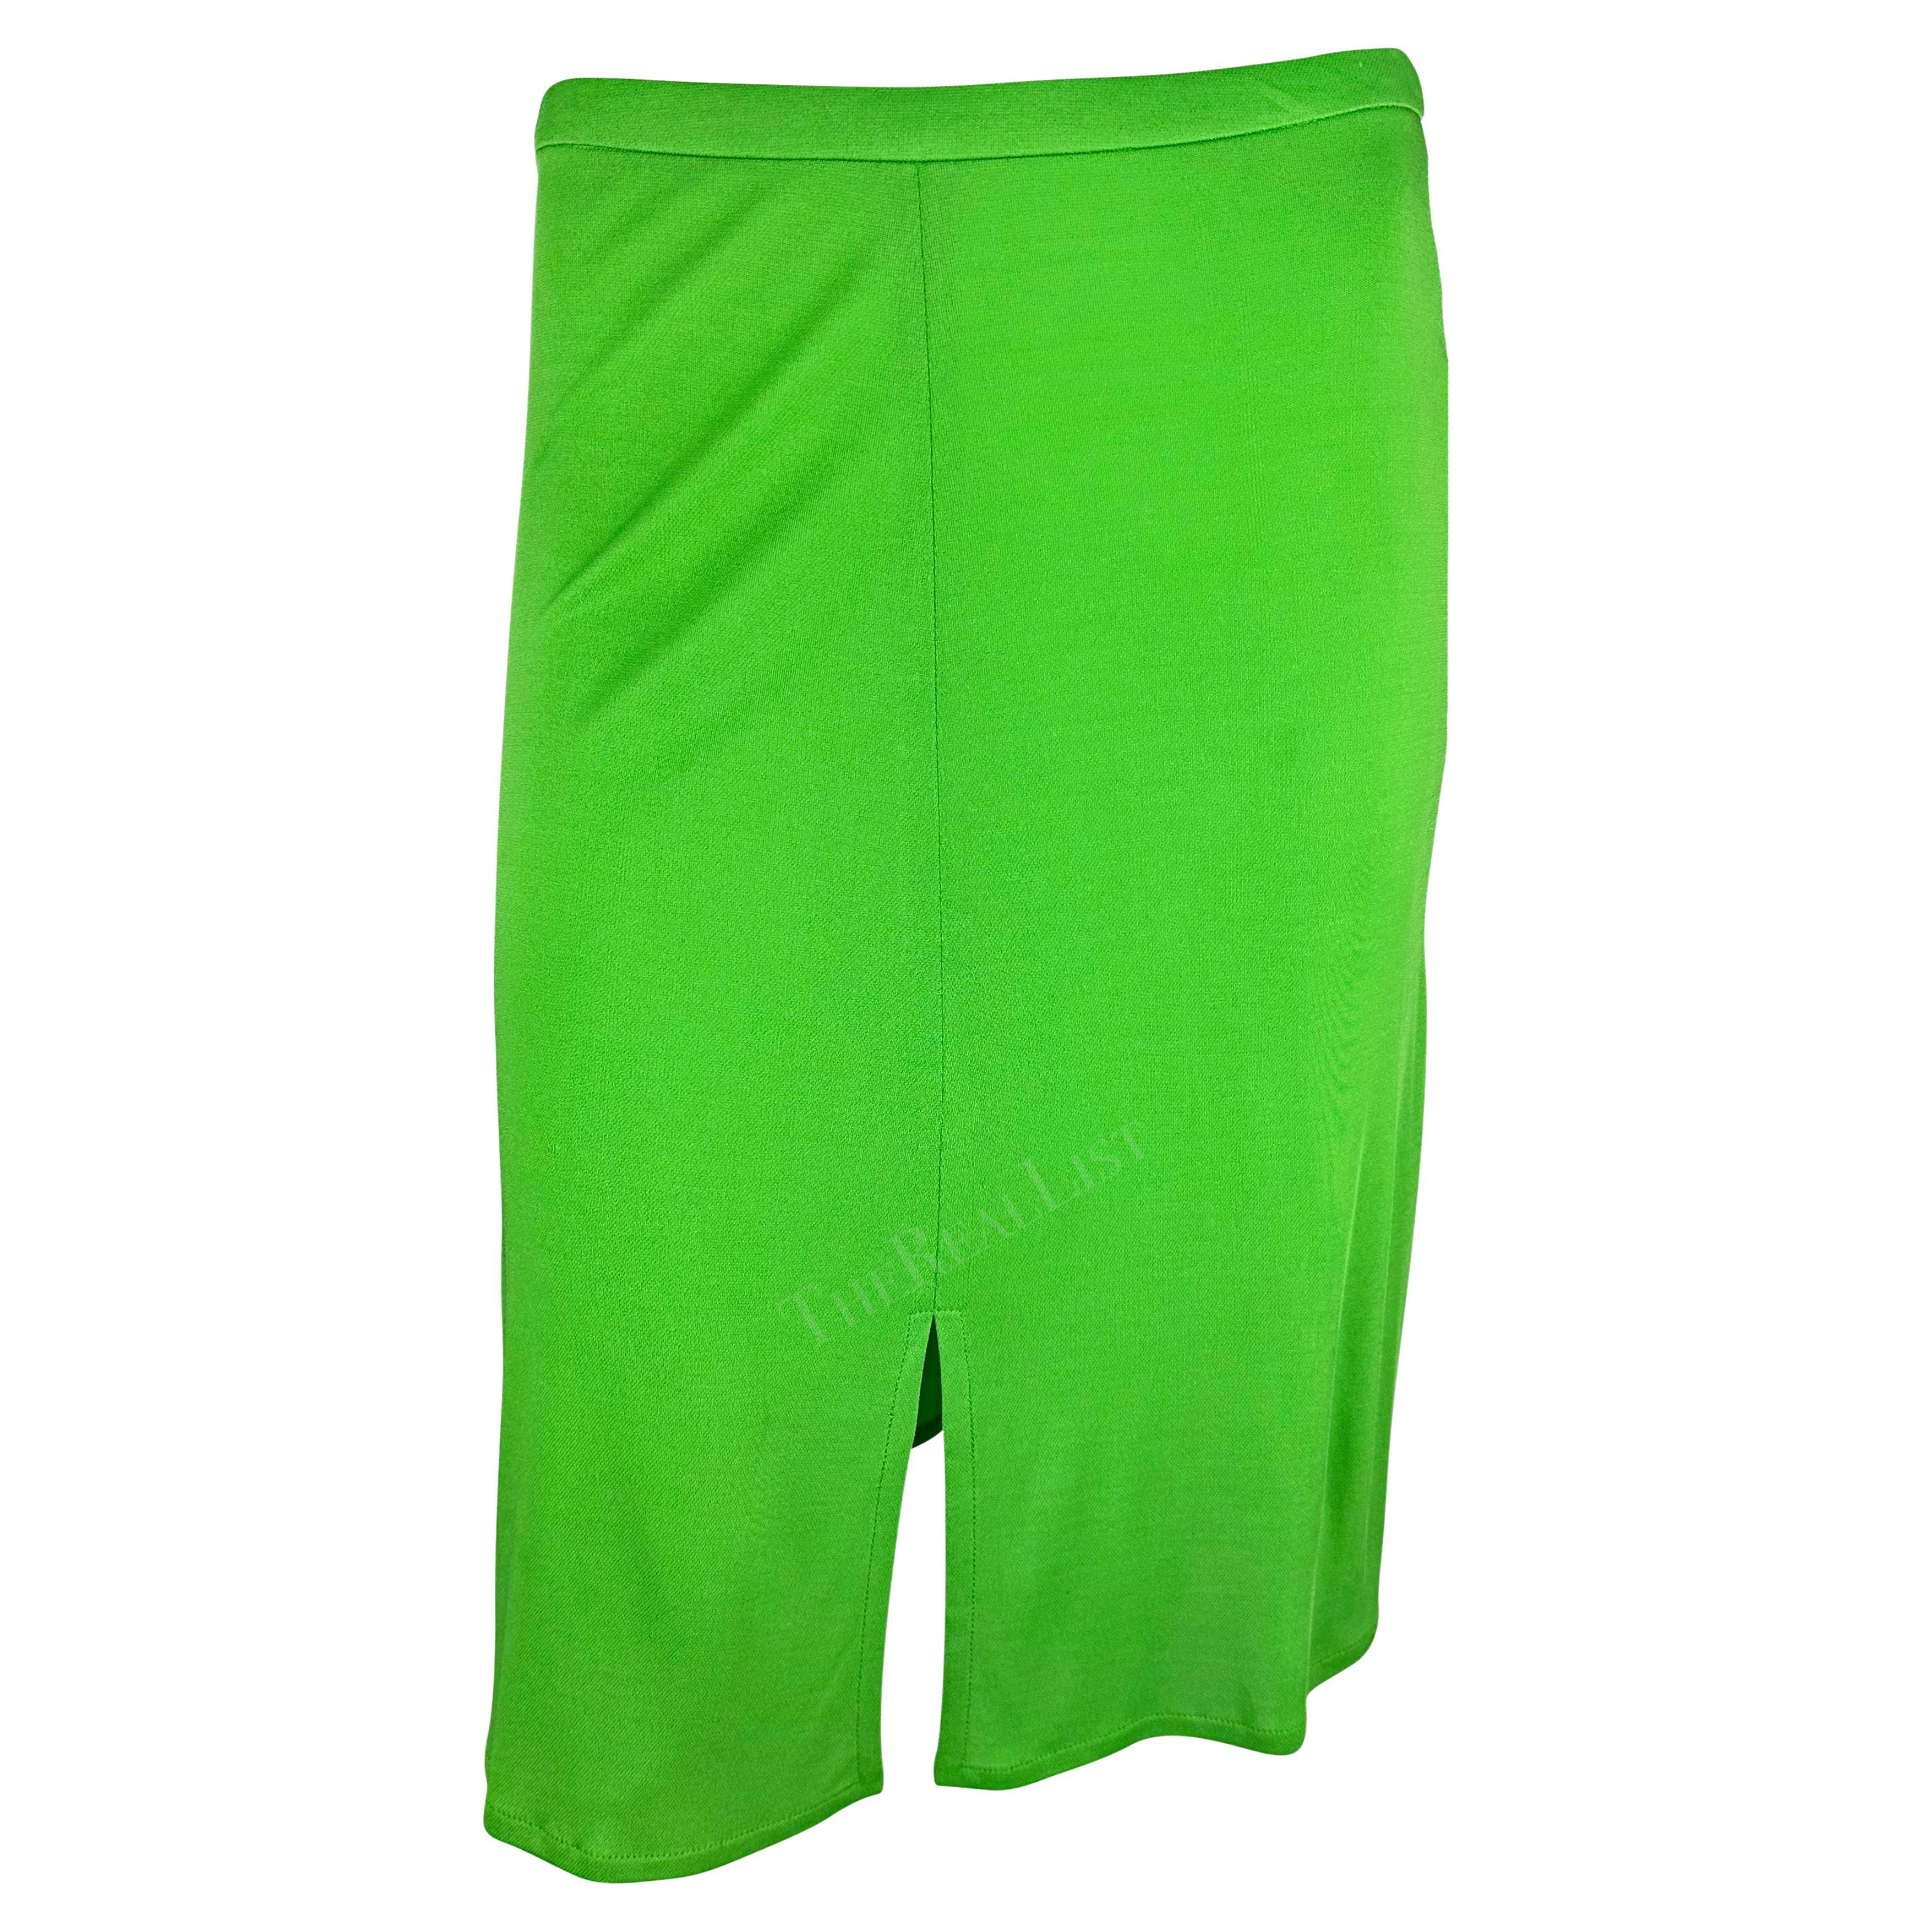 S/S 2000 Gianni Versace by Donatella Bright Green Viscose Slit Skirt For Sale